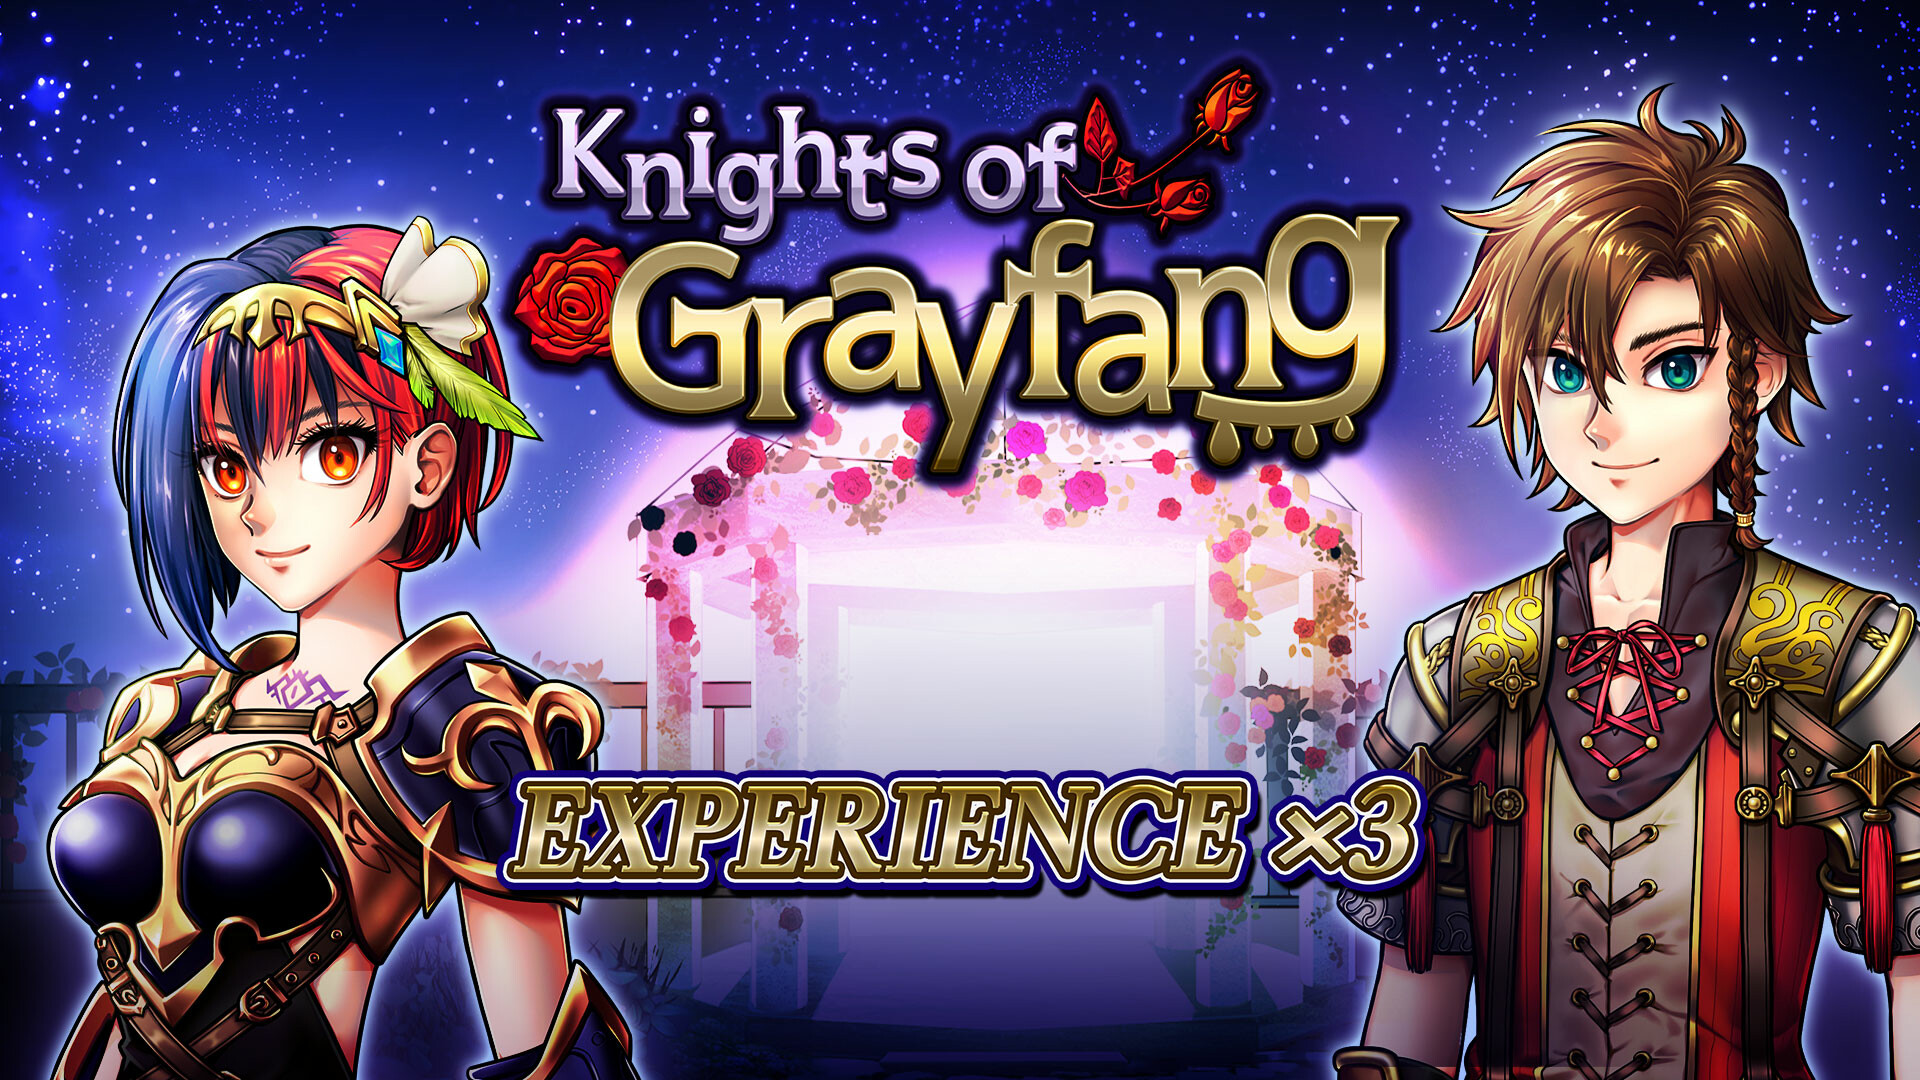 Experience x3 - Knights of Grayfang Featured Screenshot #1